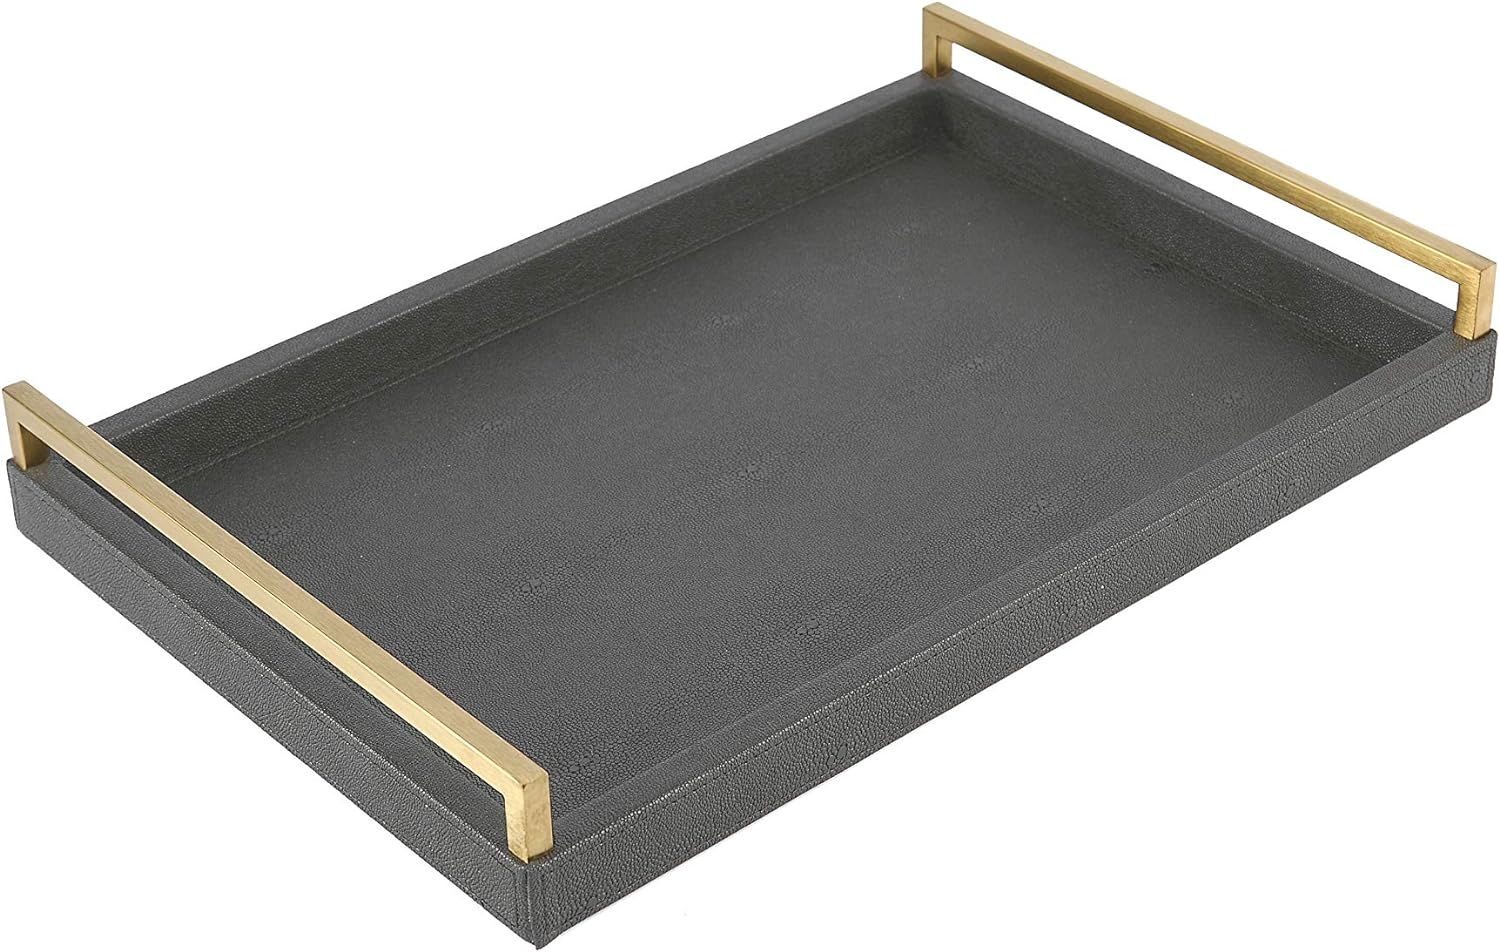 WV Decorative Tray Faux Shagreen Leather with Brushed Ti-Gold Stainless Steel Handle (Dark Grey) | Amazon (US)